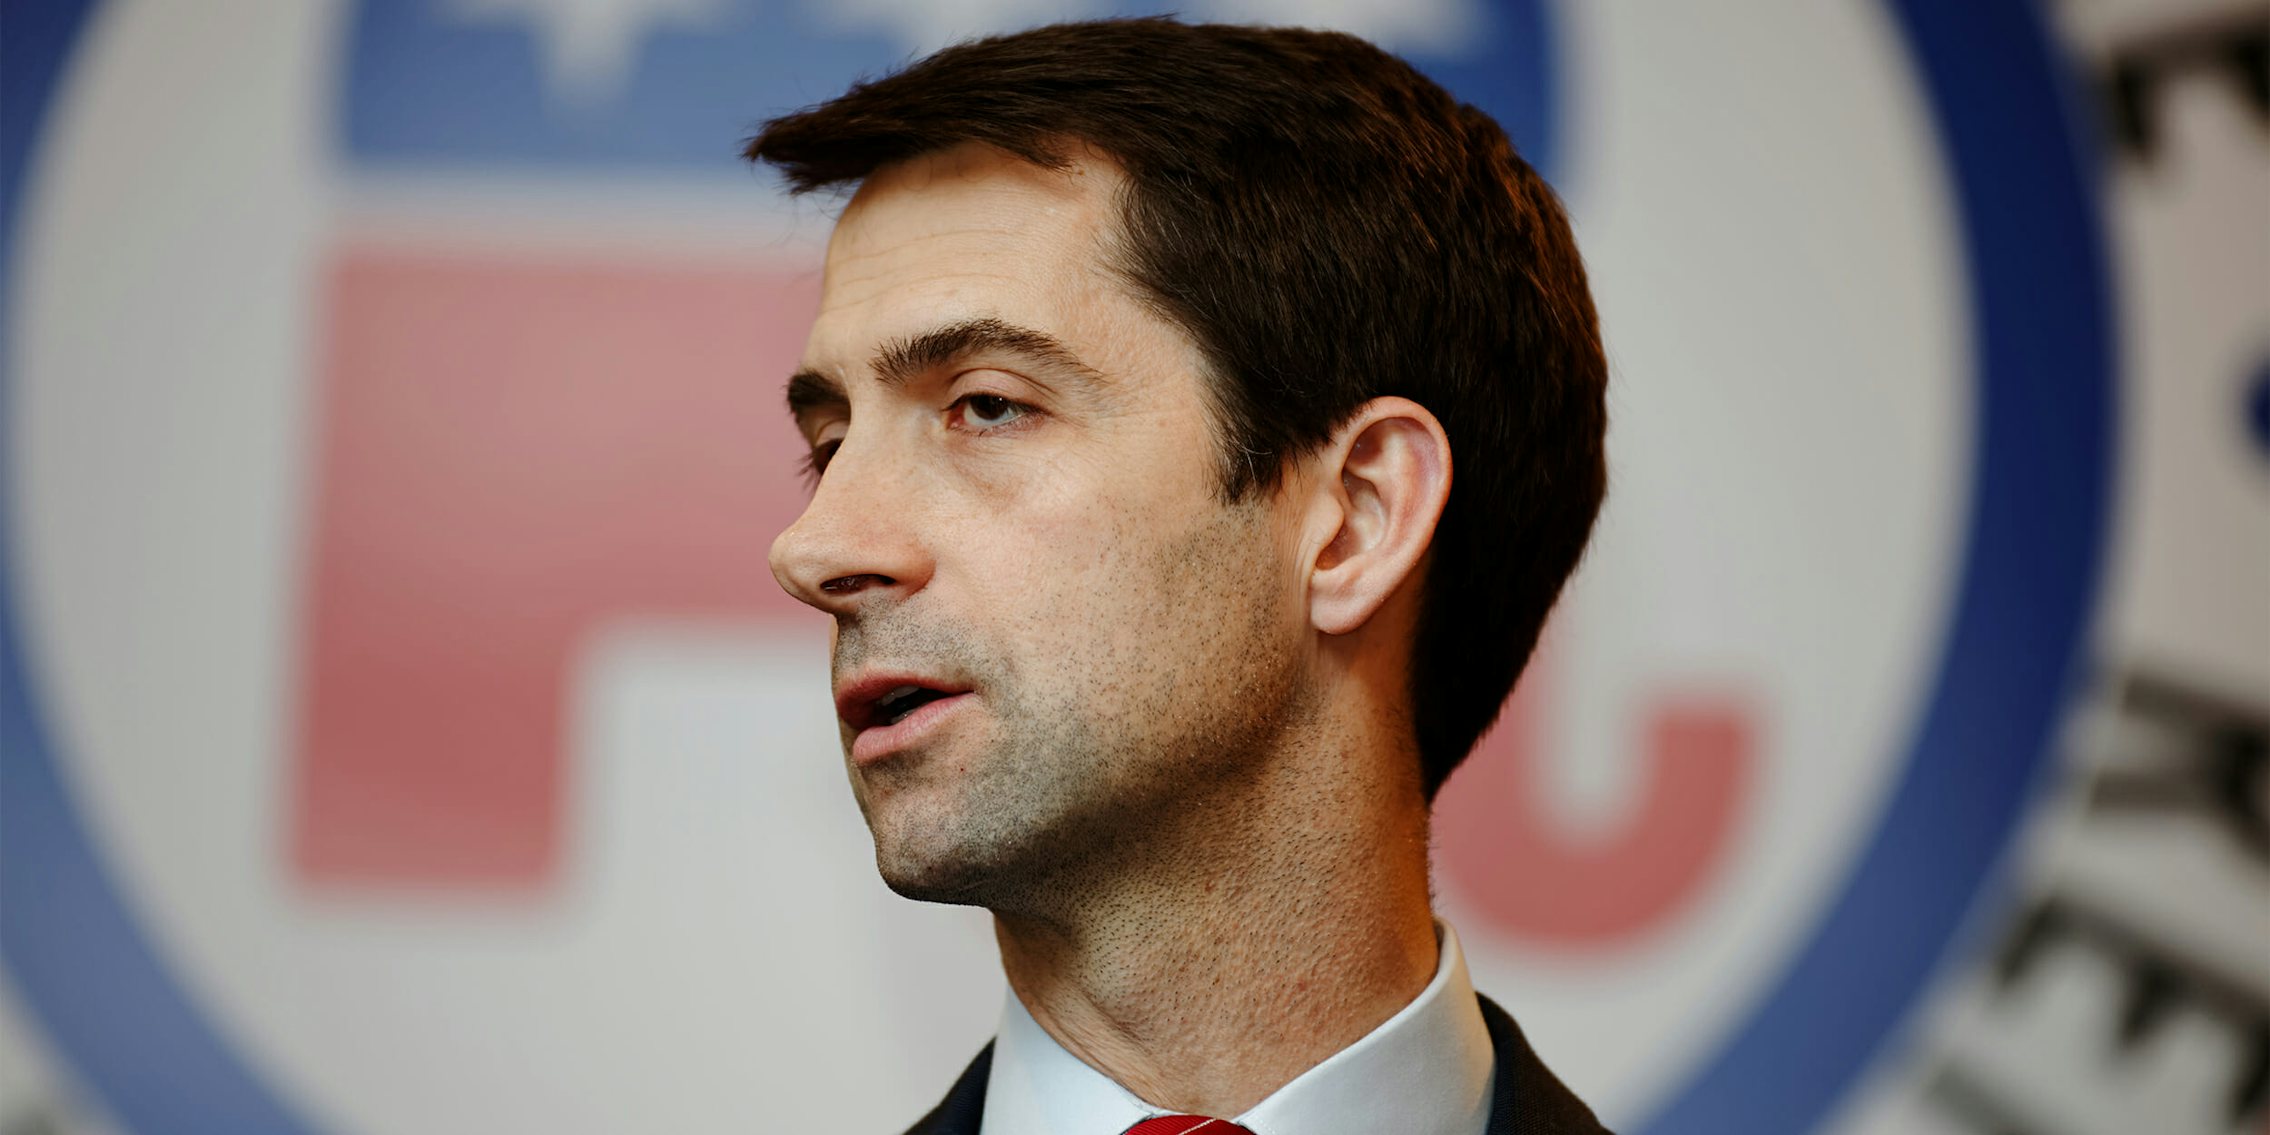 Tom Cotton in front of GOP logo